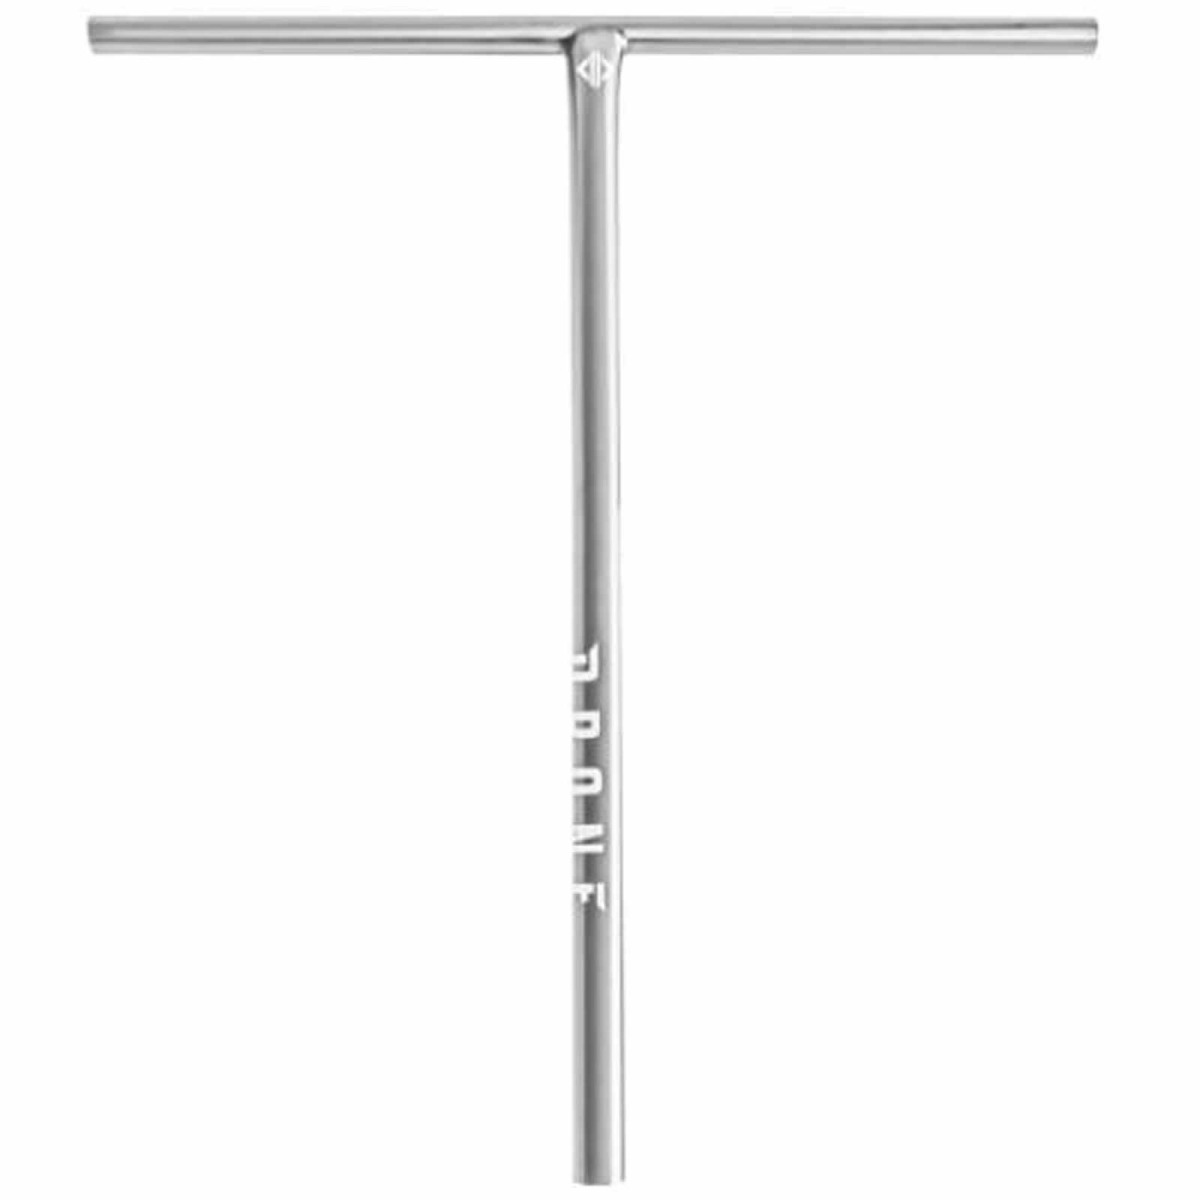 An image of Drone Relic 2 SCS / IHC Scooter T Bars - Polished Silver Chrome – 650mm x 600m...